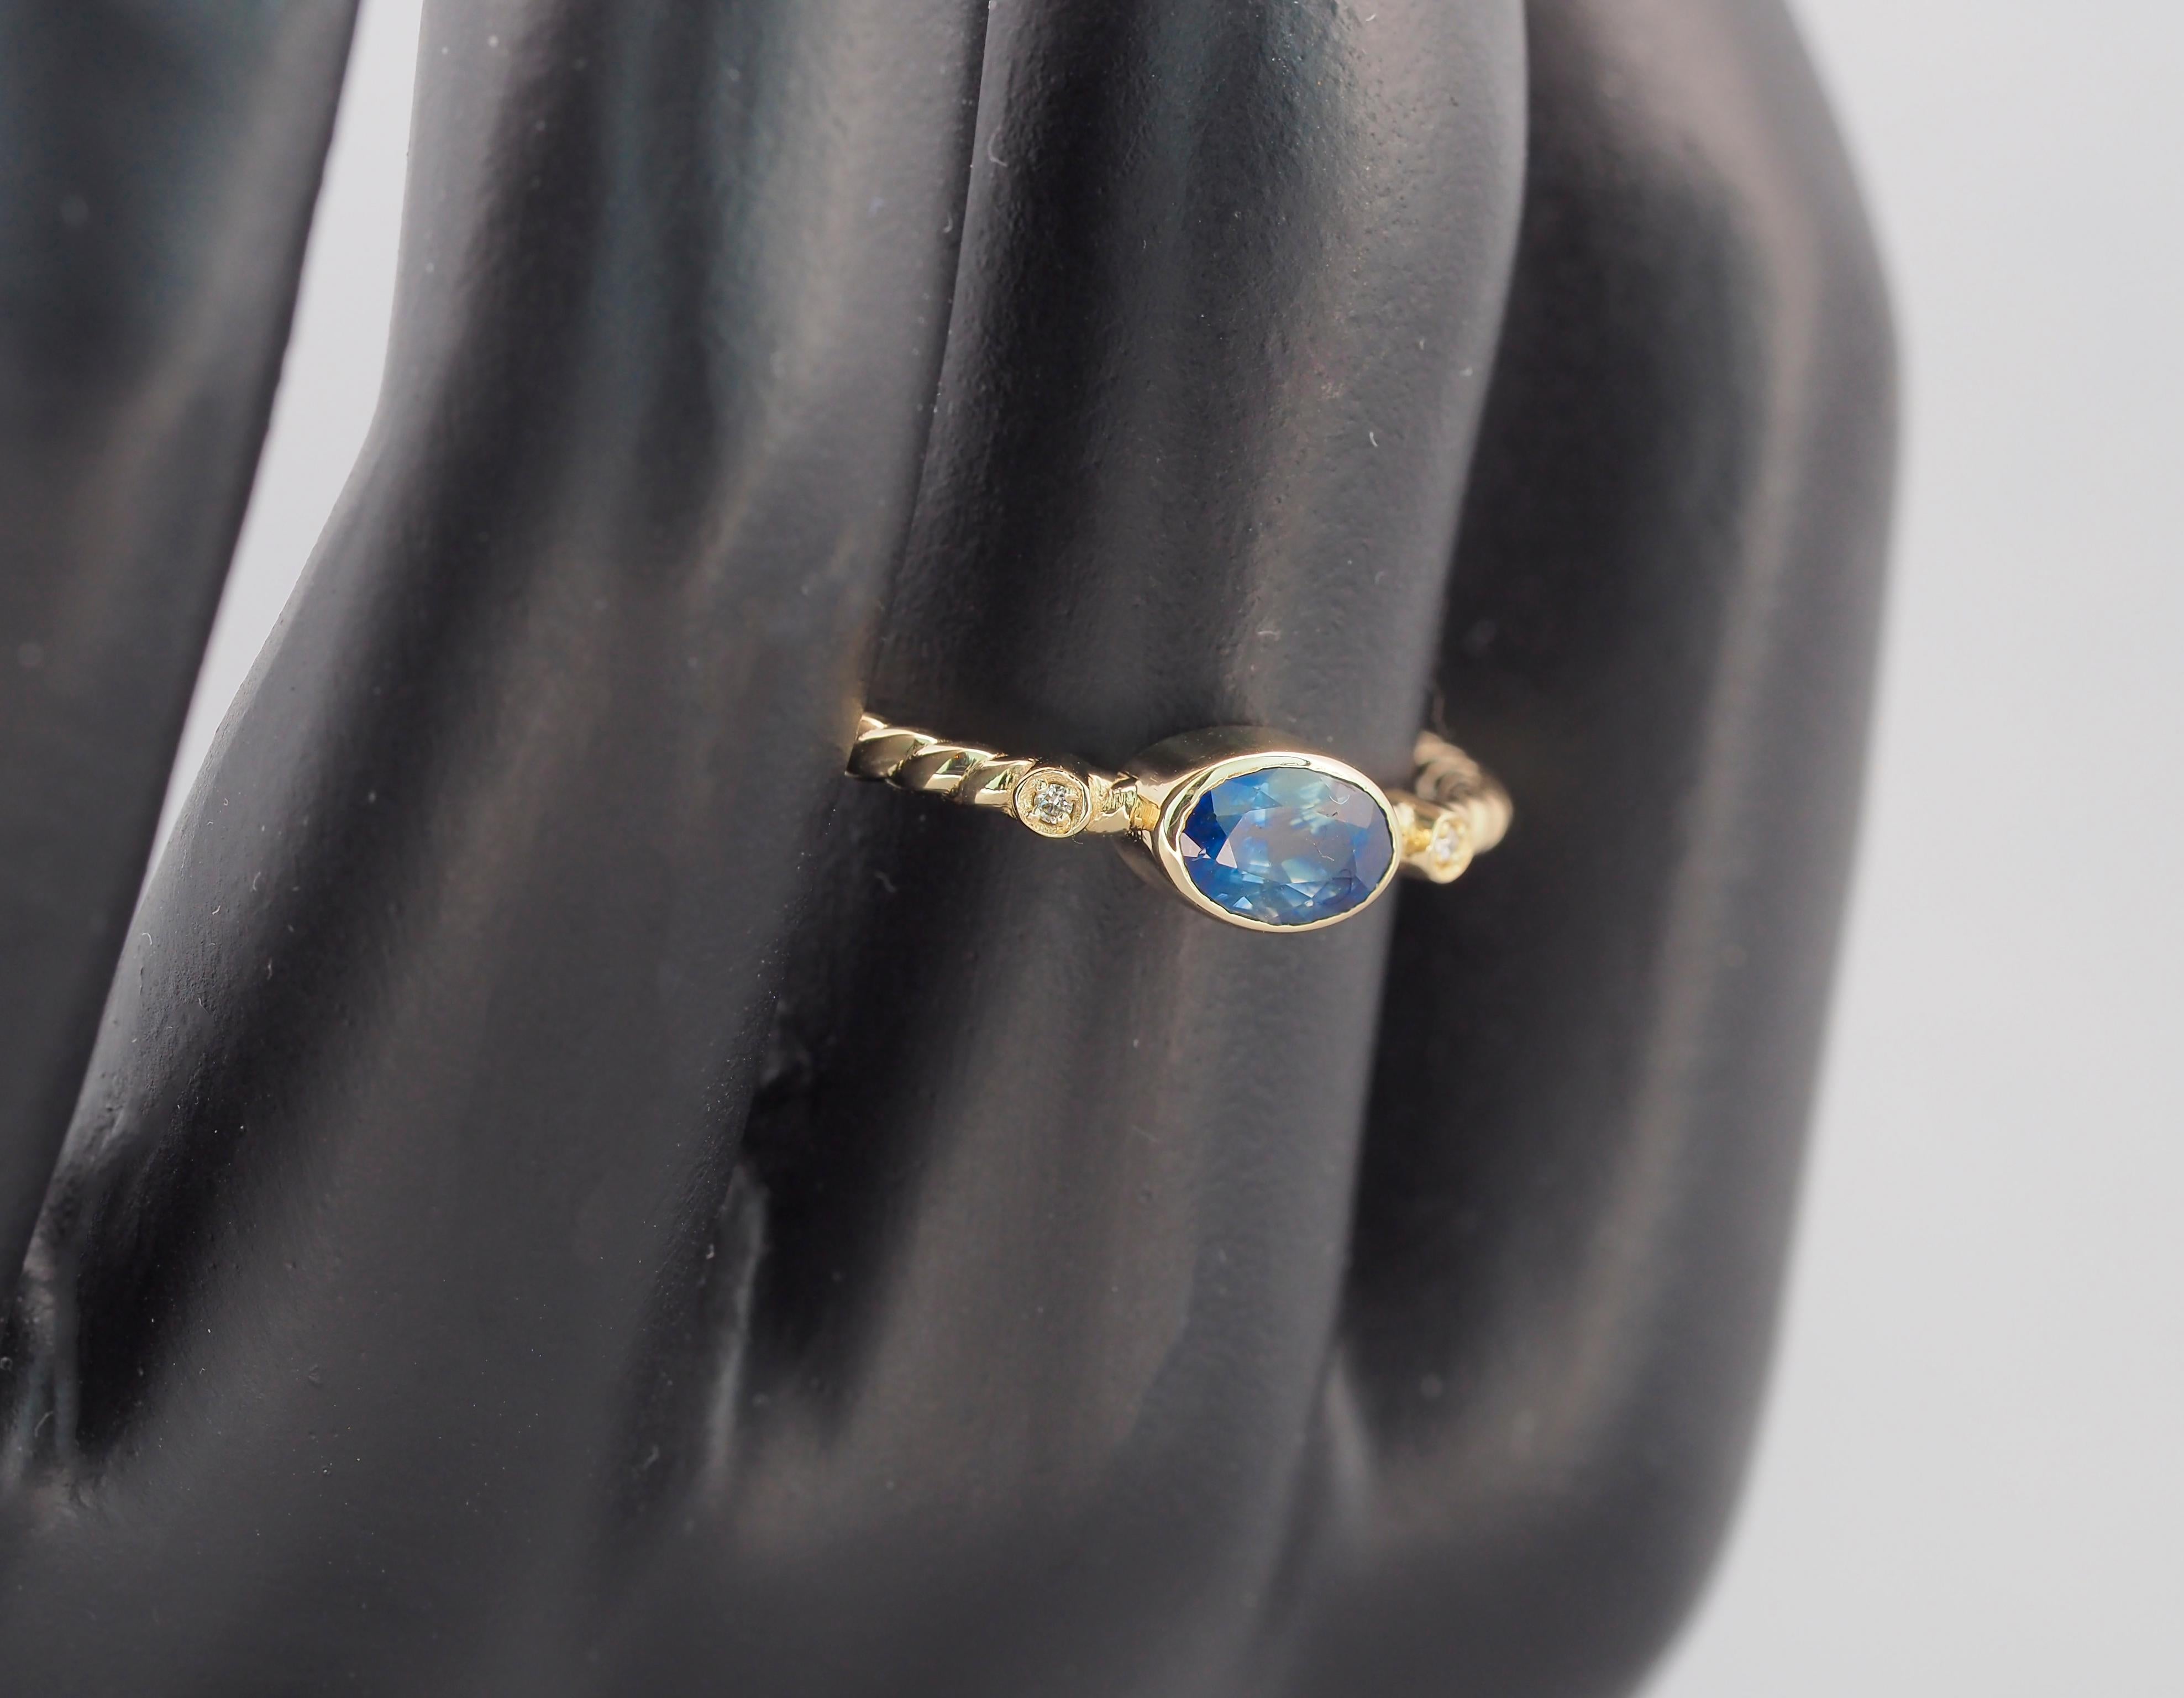 For Sale:  Blue sapphire ring in 14k gold.  7